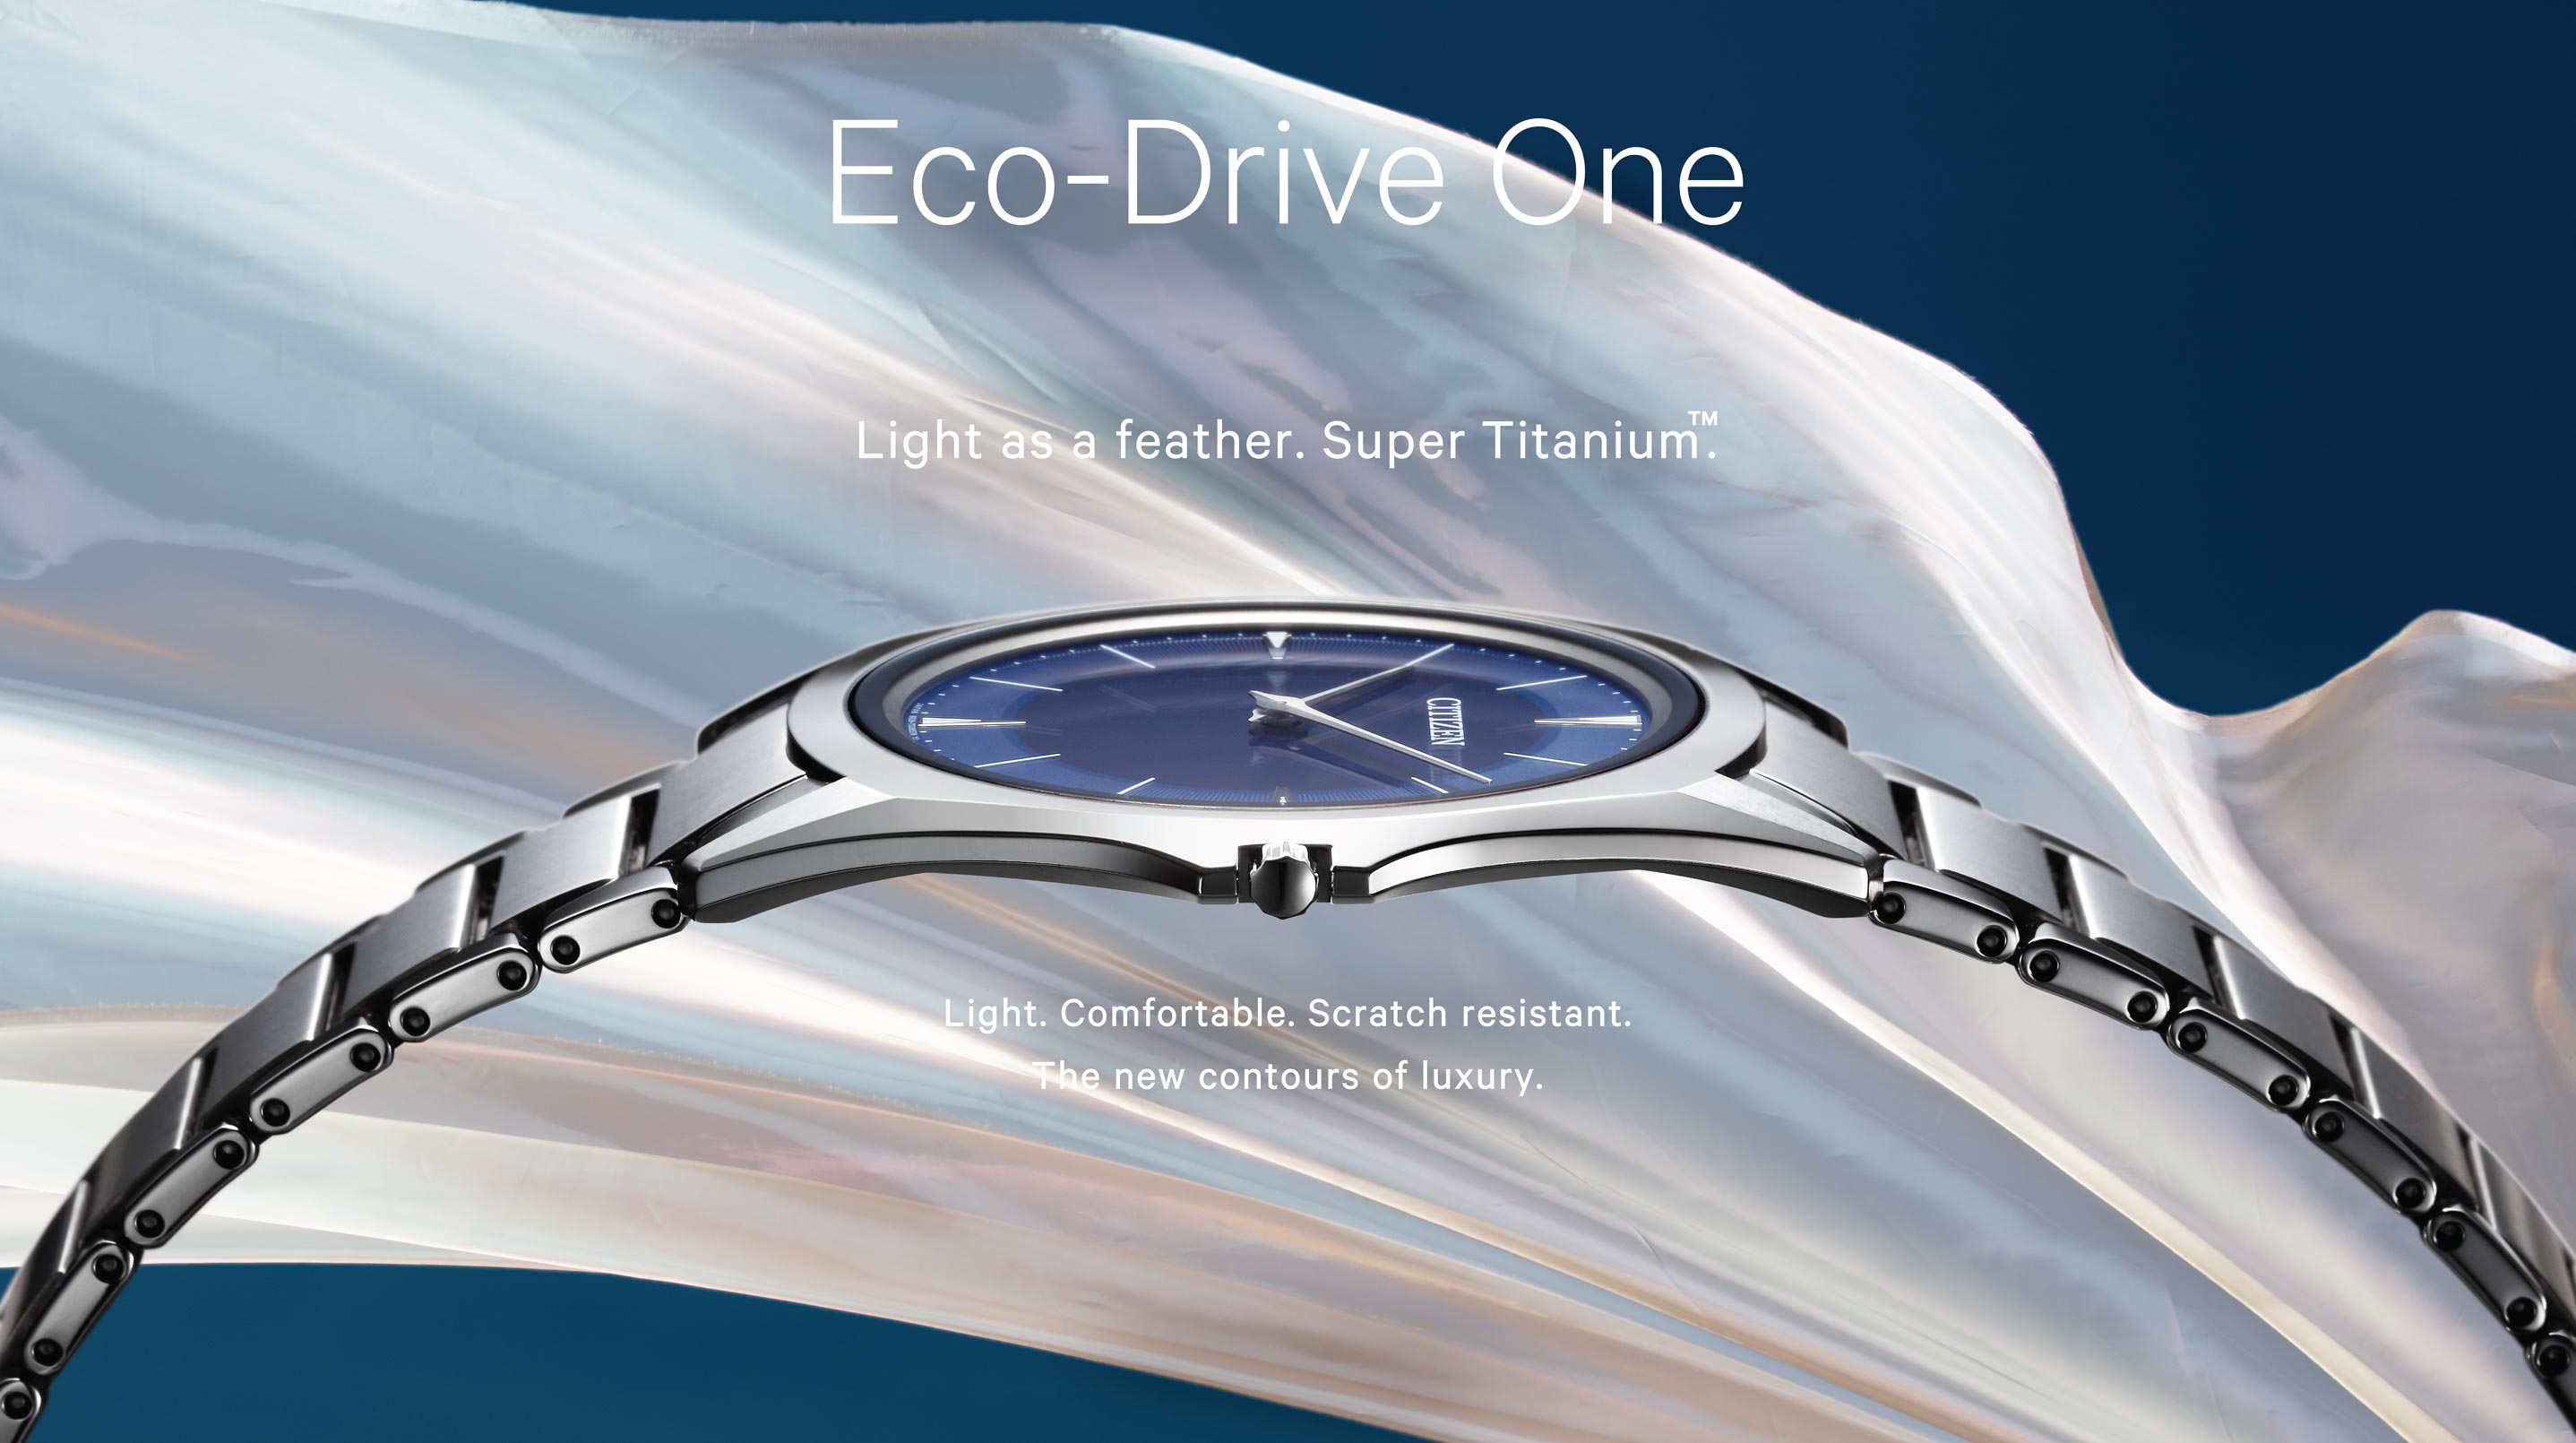 Recommended Products For Eco-Drive one